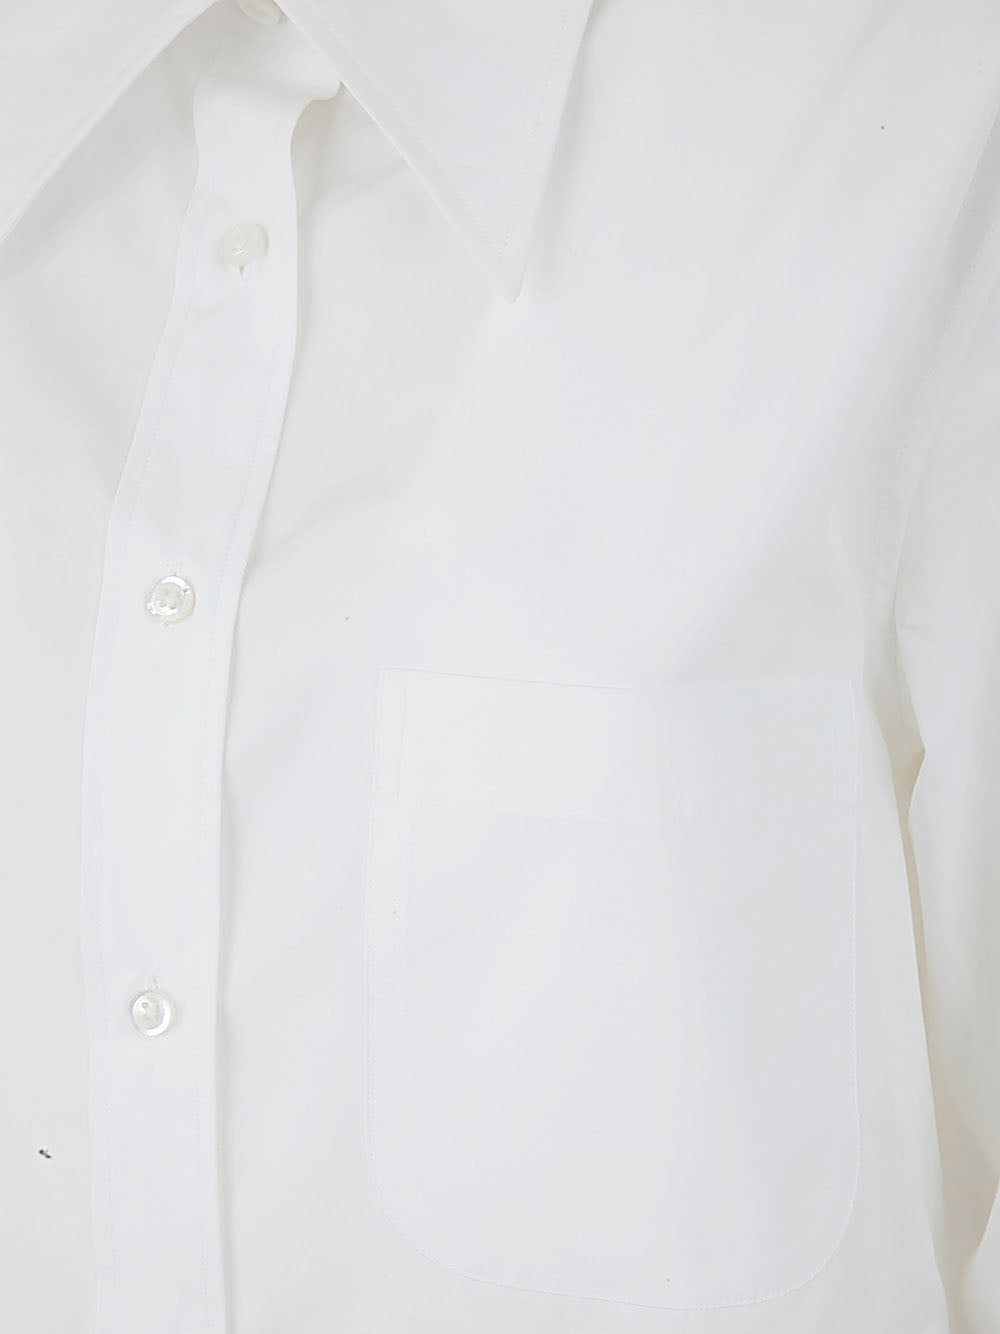 Exaggerated Easy Fit Point Collar Shirt In Poplin